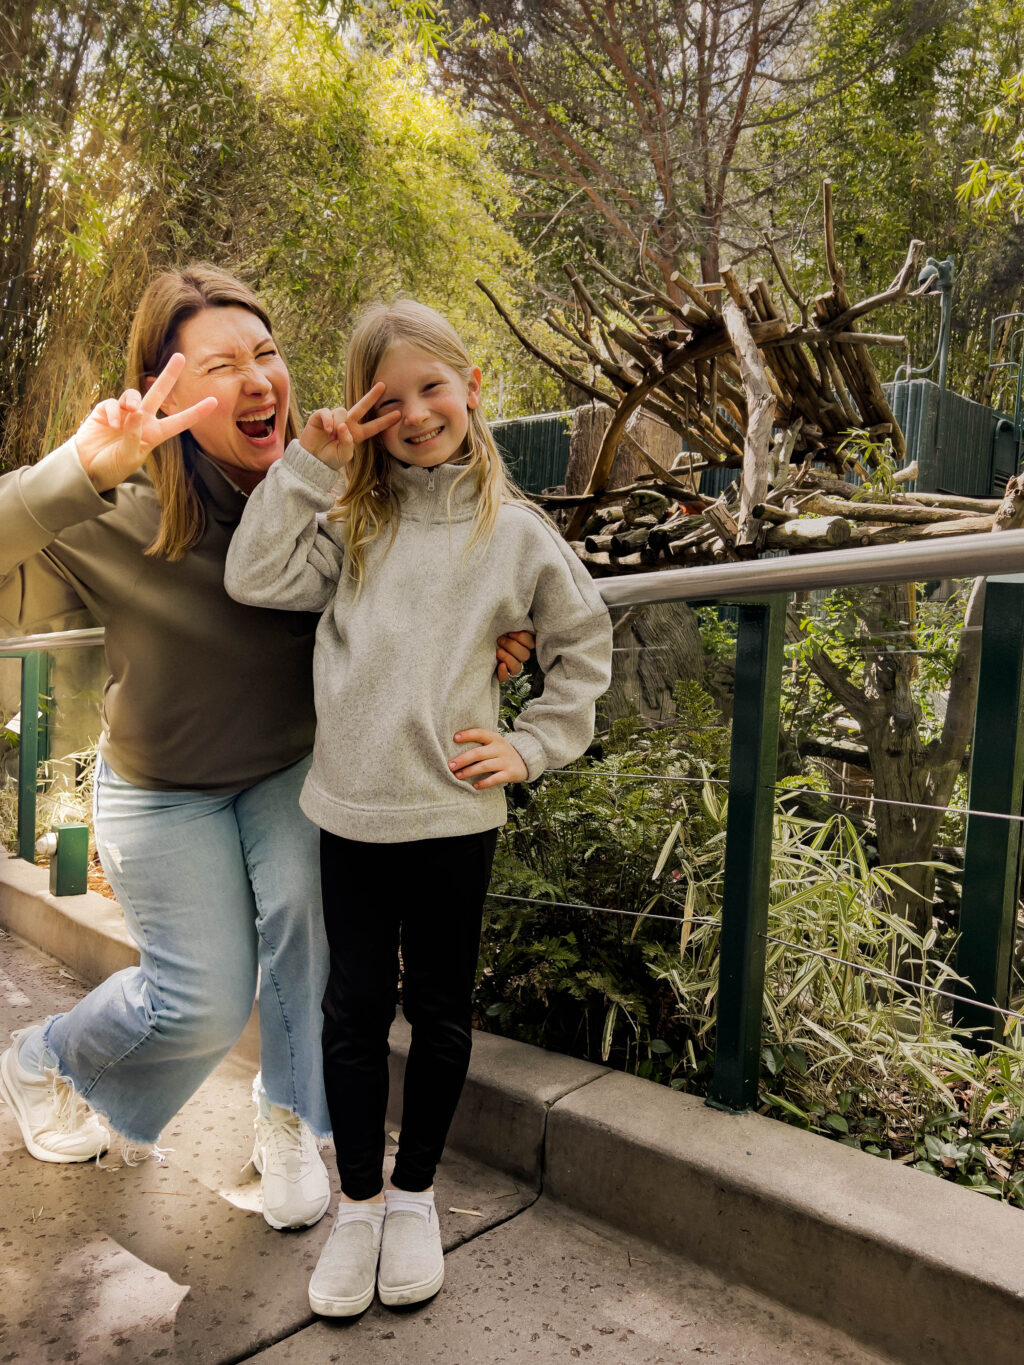 Trying to decide whether to visit the san diego zoo vs safari park ? This is the ultimate guide to both san diego vacation destinations!